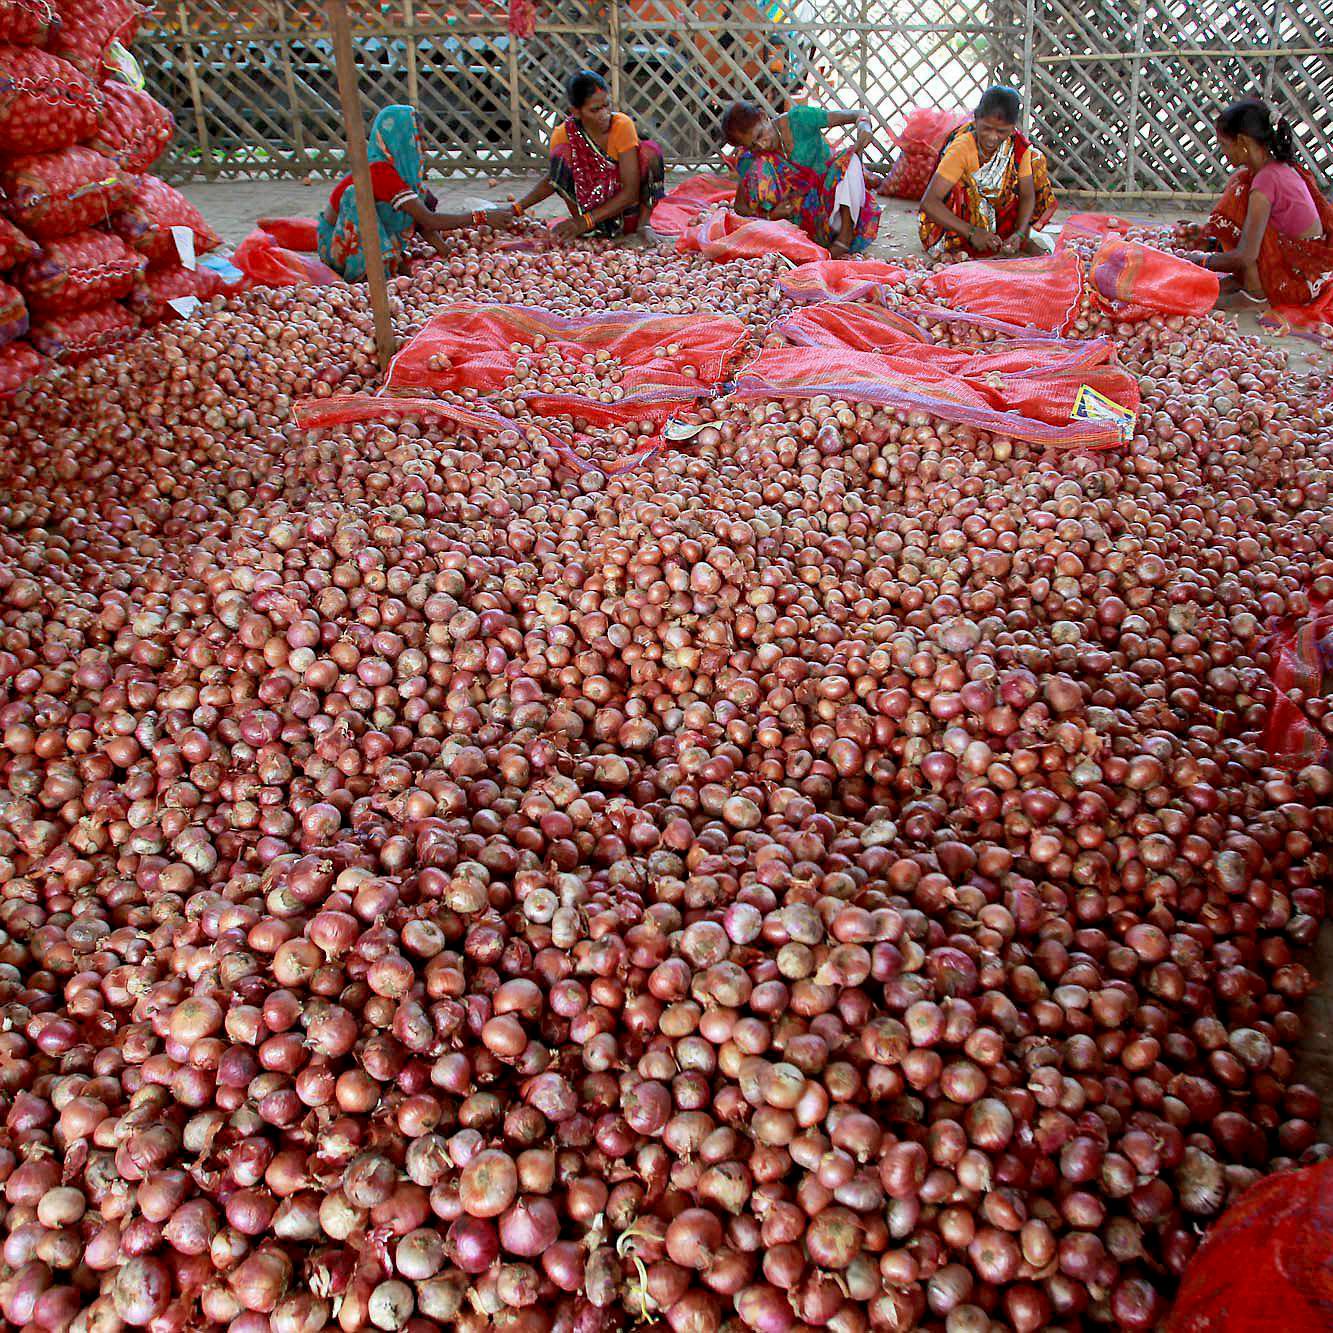 250 tonnes of imported onion reach India, prices may cool